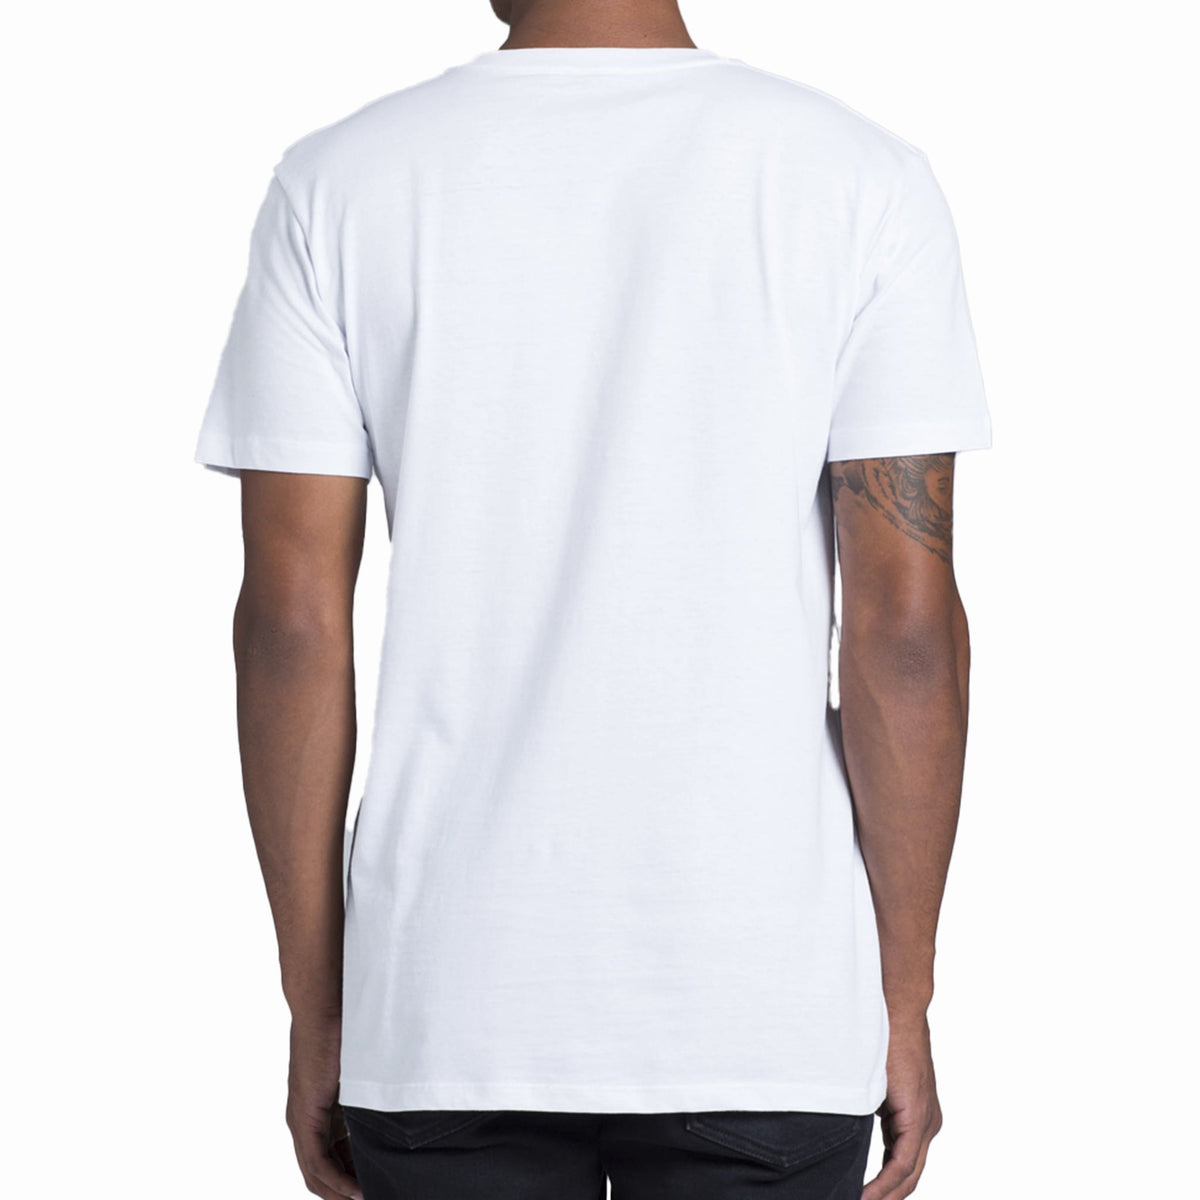 back view of white t shirt